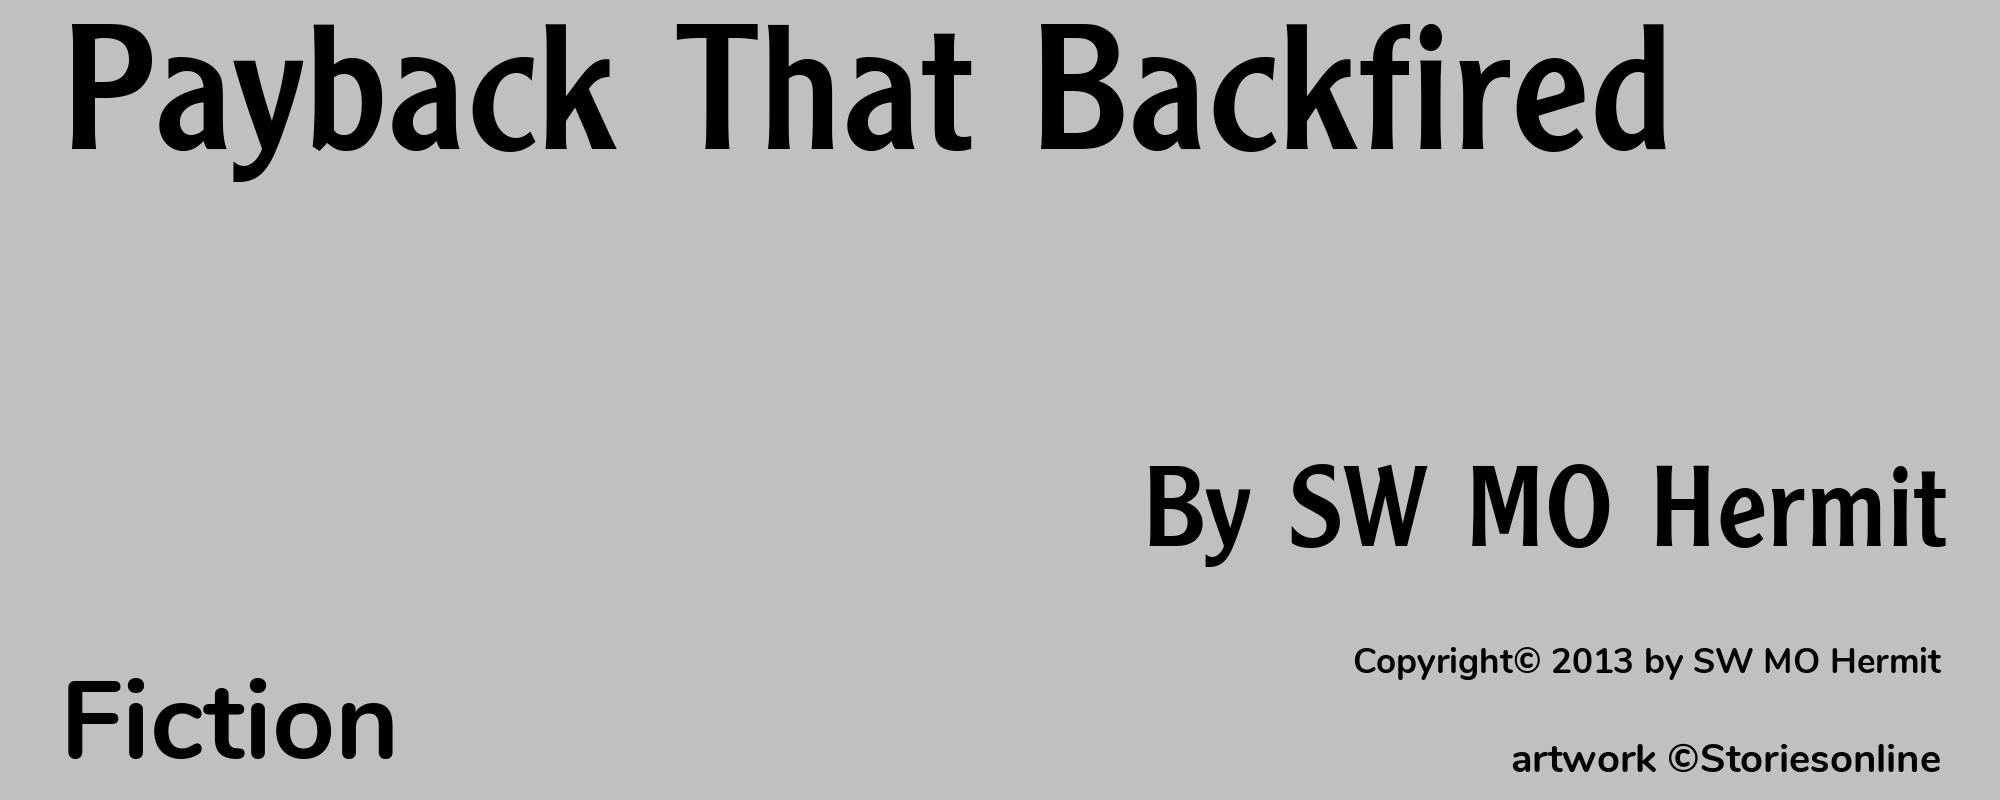 Payback That Backfired - Cover